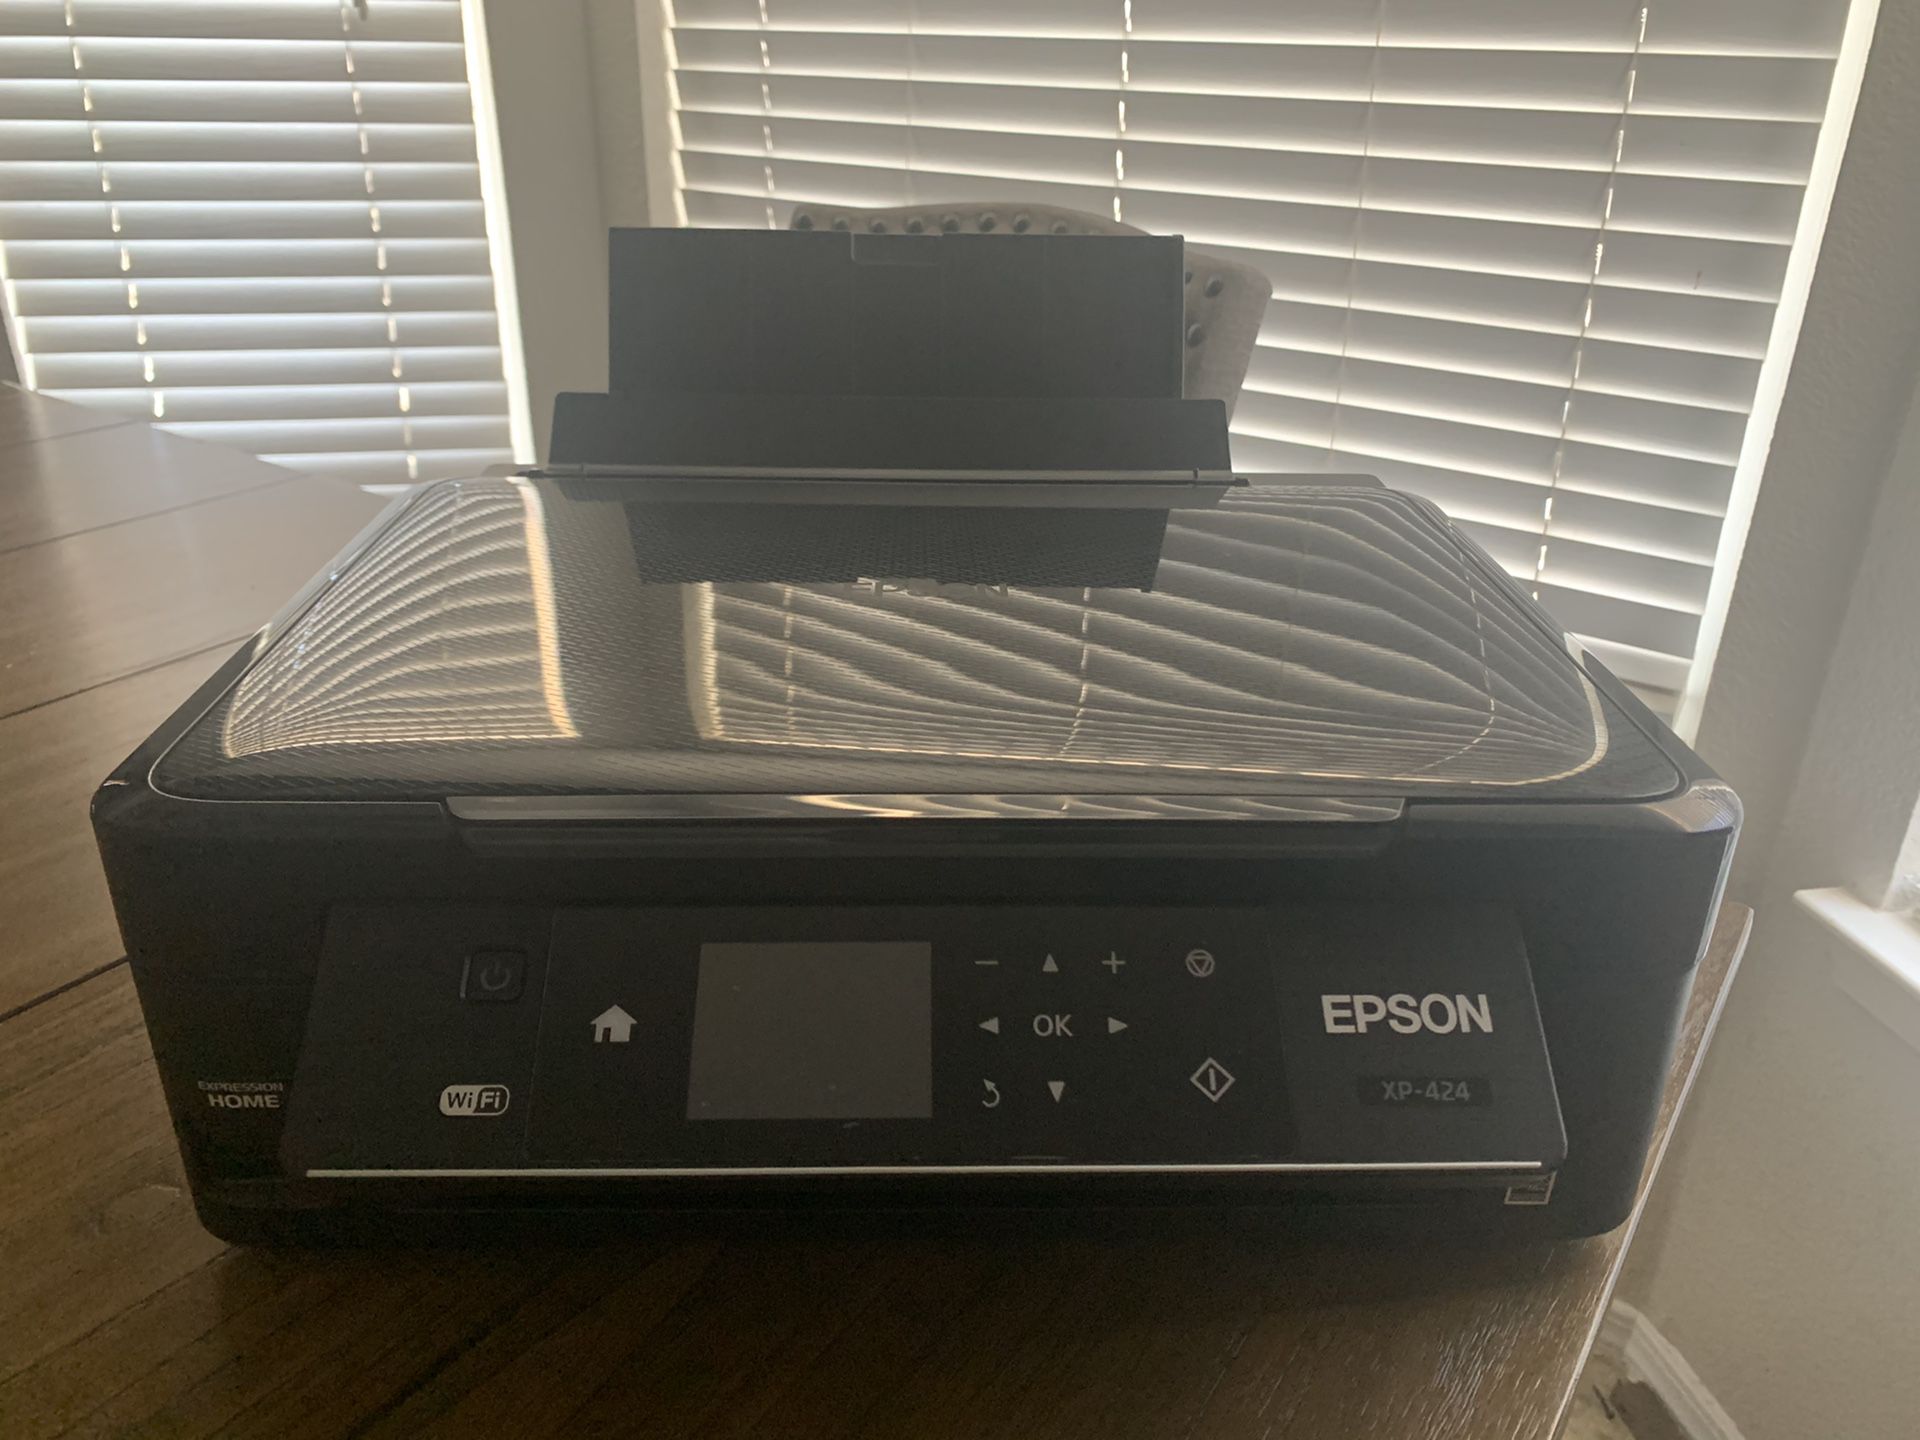 Epson Printer wirelessly Connects. USB WiFi